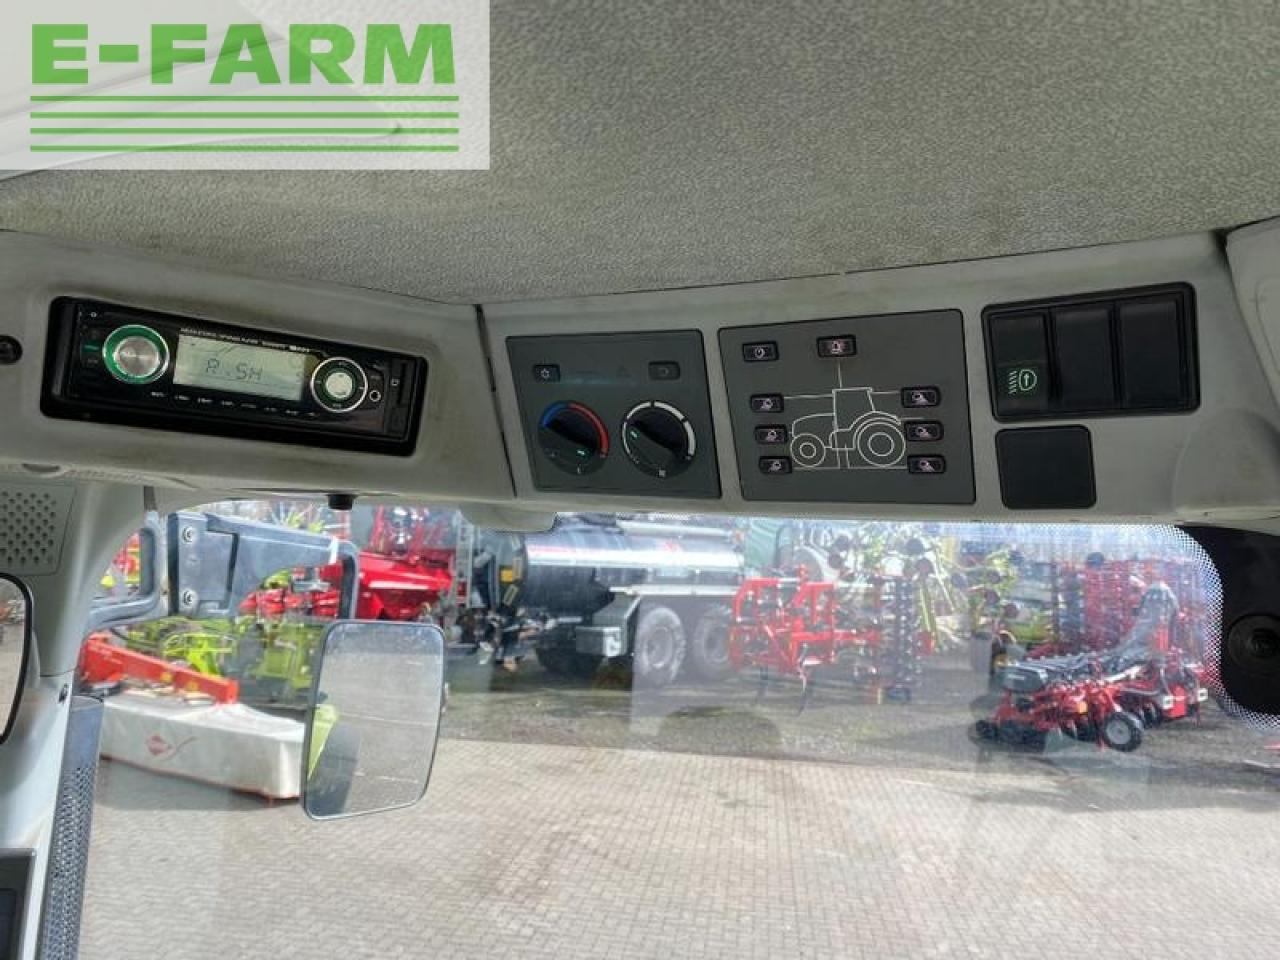 Tracteur agricole CLAAS arion 650 hexashift cis